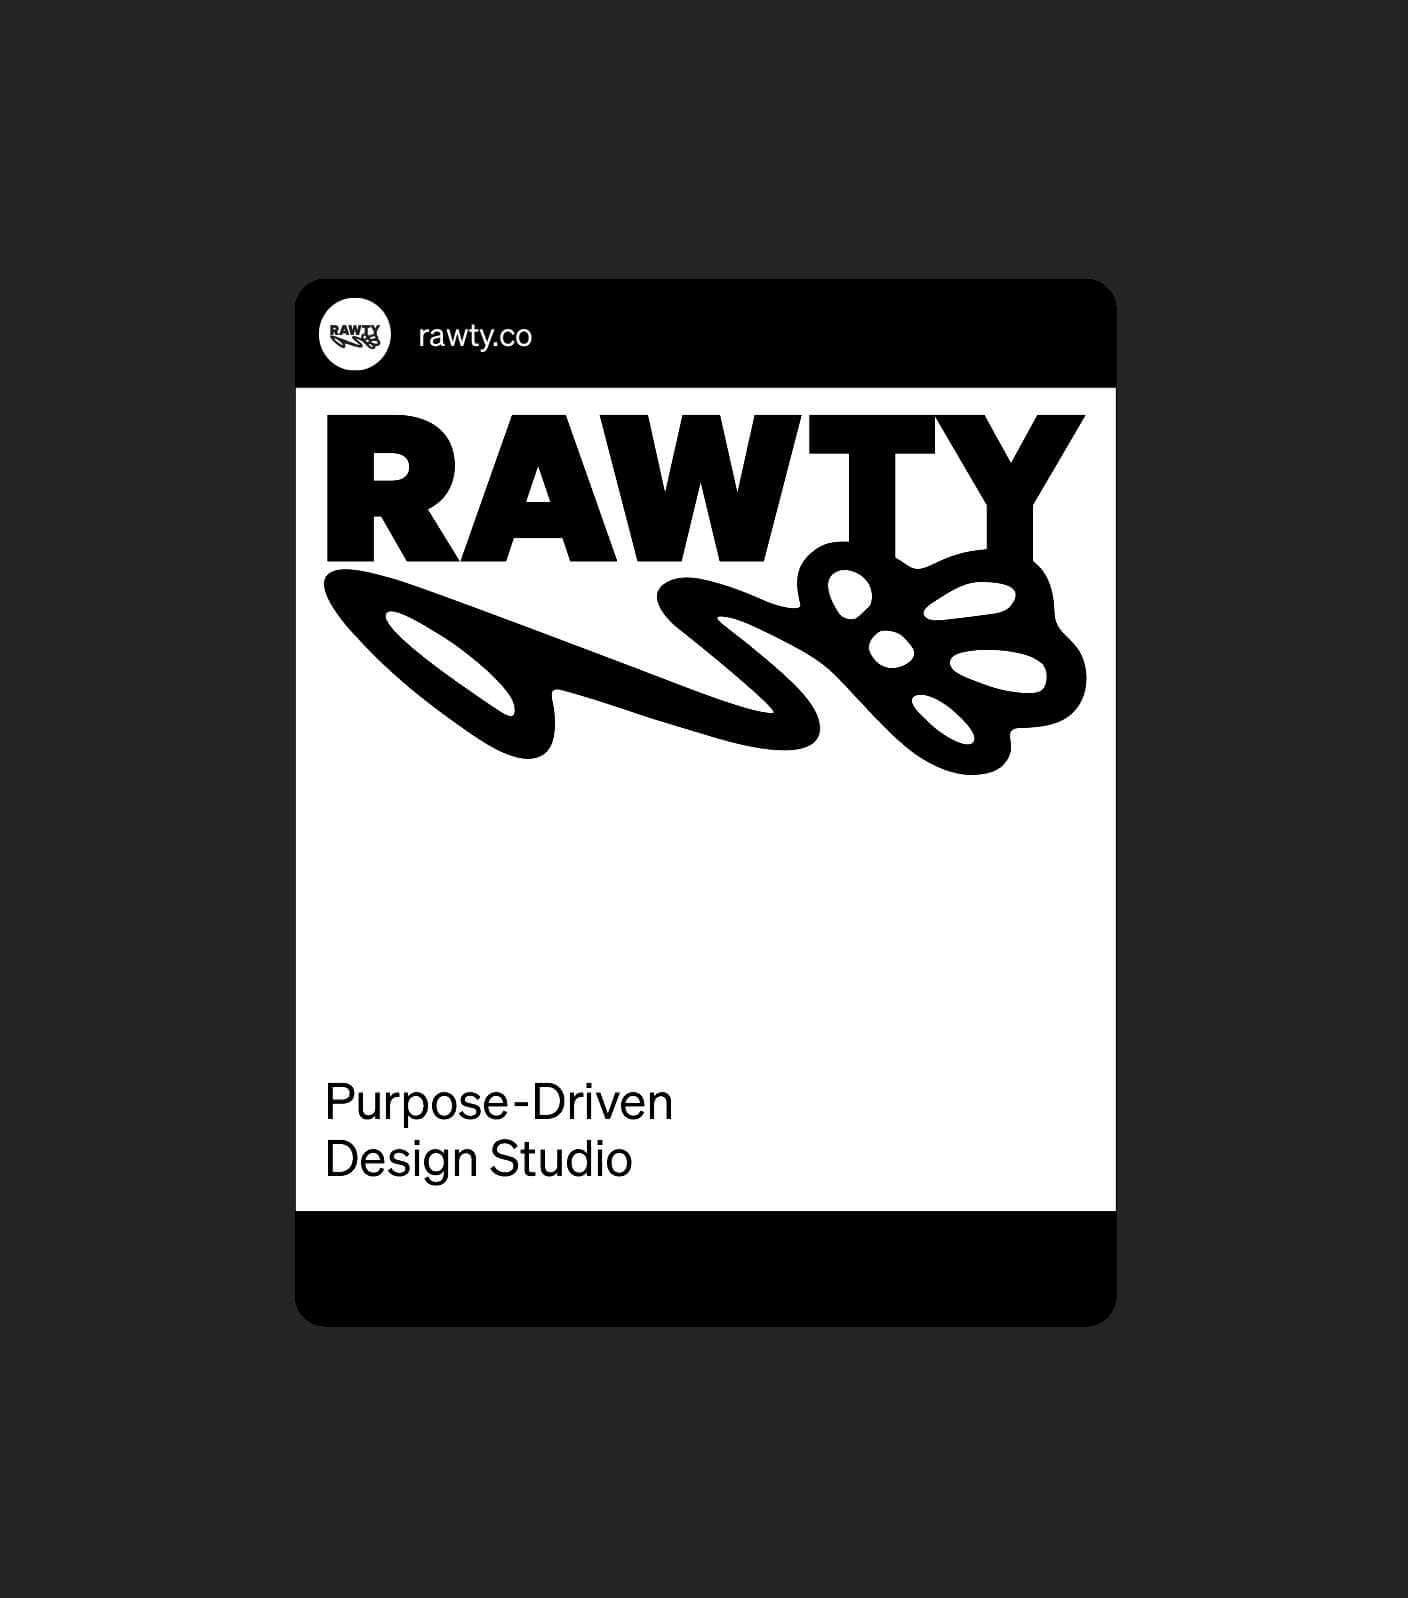 An instagram post by RAWTY showing the logo and the subline 